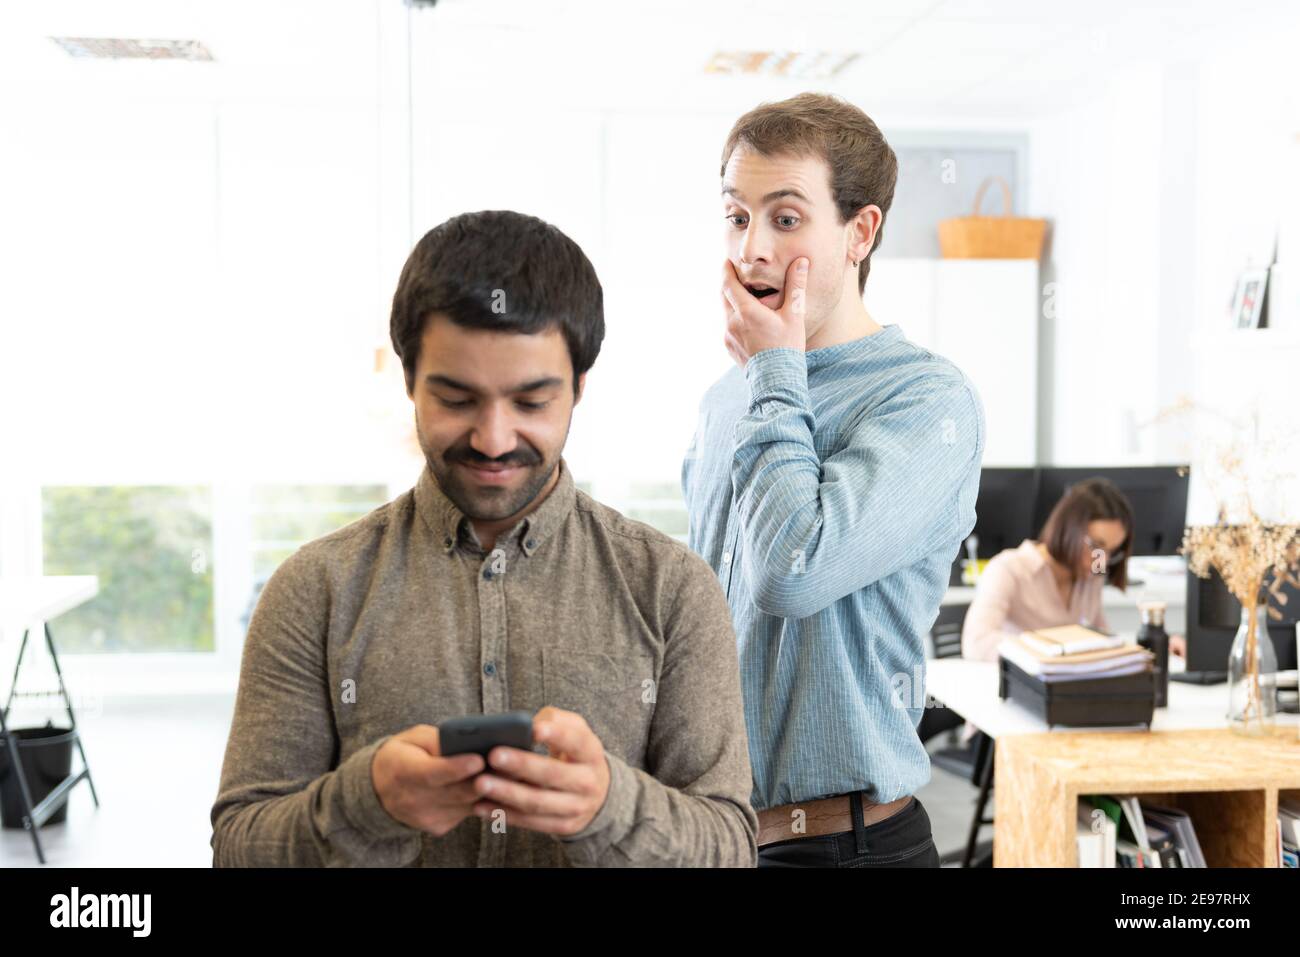 Surprised young man spying a coworker while he is looking at his cell phone at the office. Stock Photo